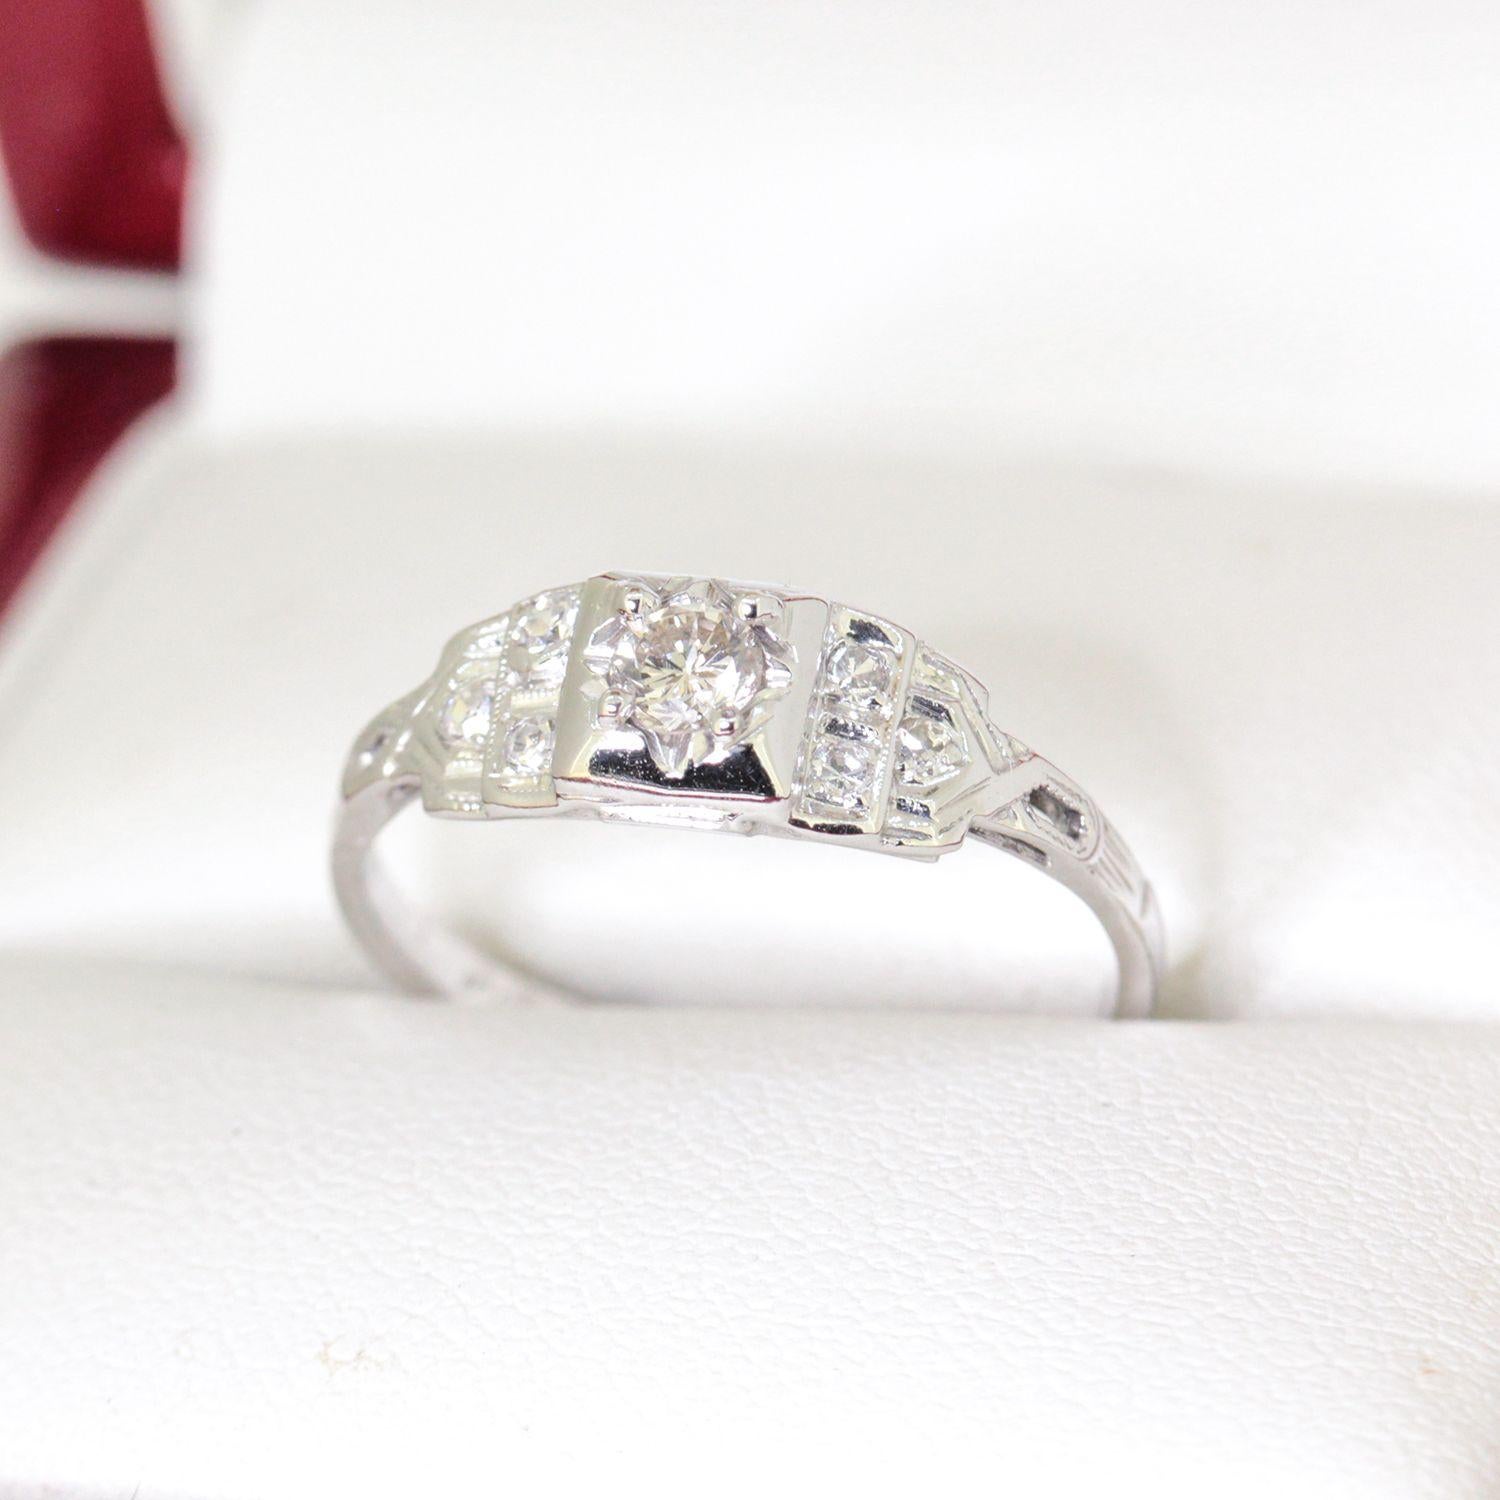 Vintage Filigree 18ct White Gold Diamond Engagement Ring with 4 claws low round diamond tapered shank.

One ladies 18ct white gold engagement ring, narrow, low half round, tapered shank, 4 claw setting, polished finish, acid tested, unstamped.

The